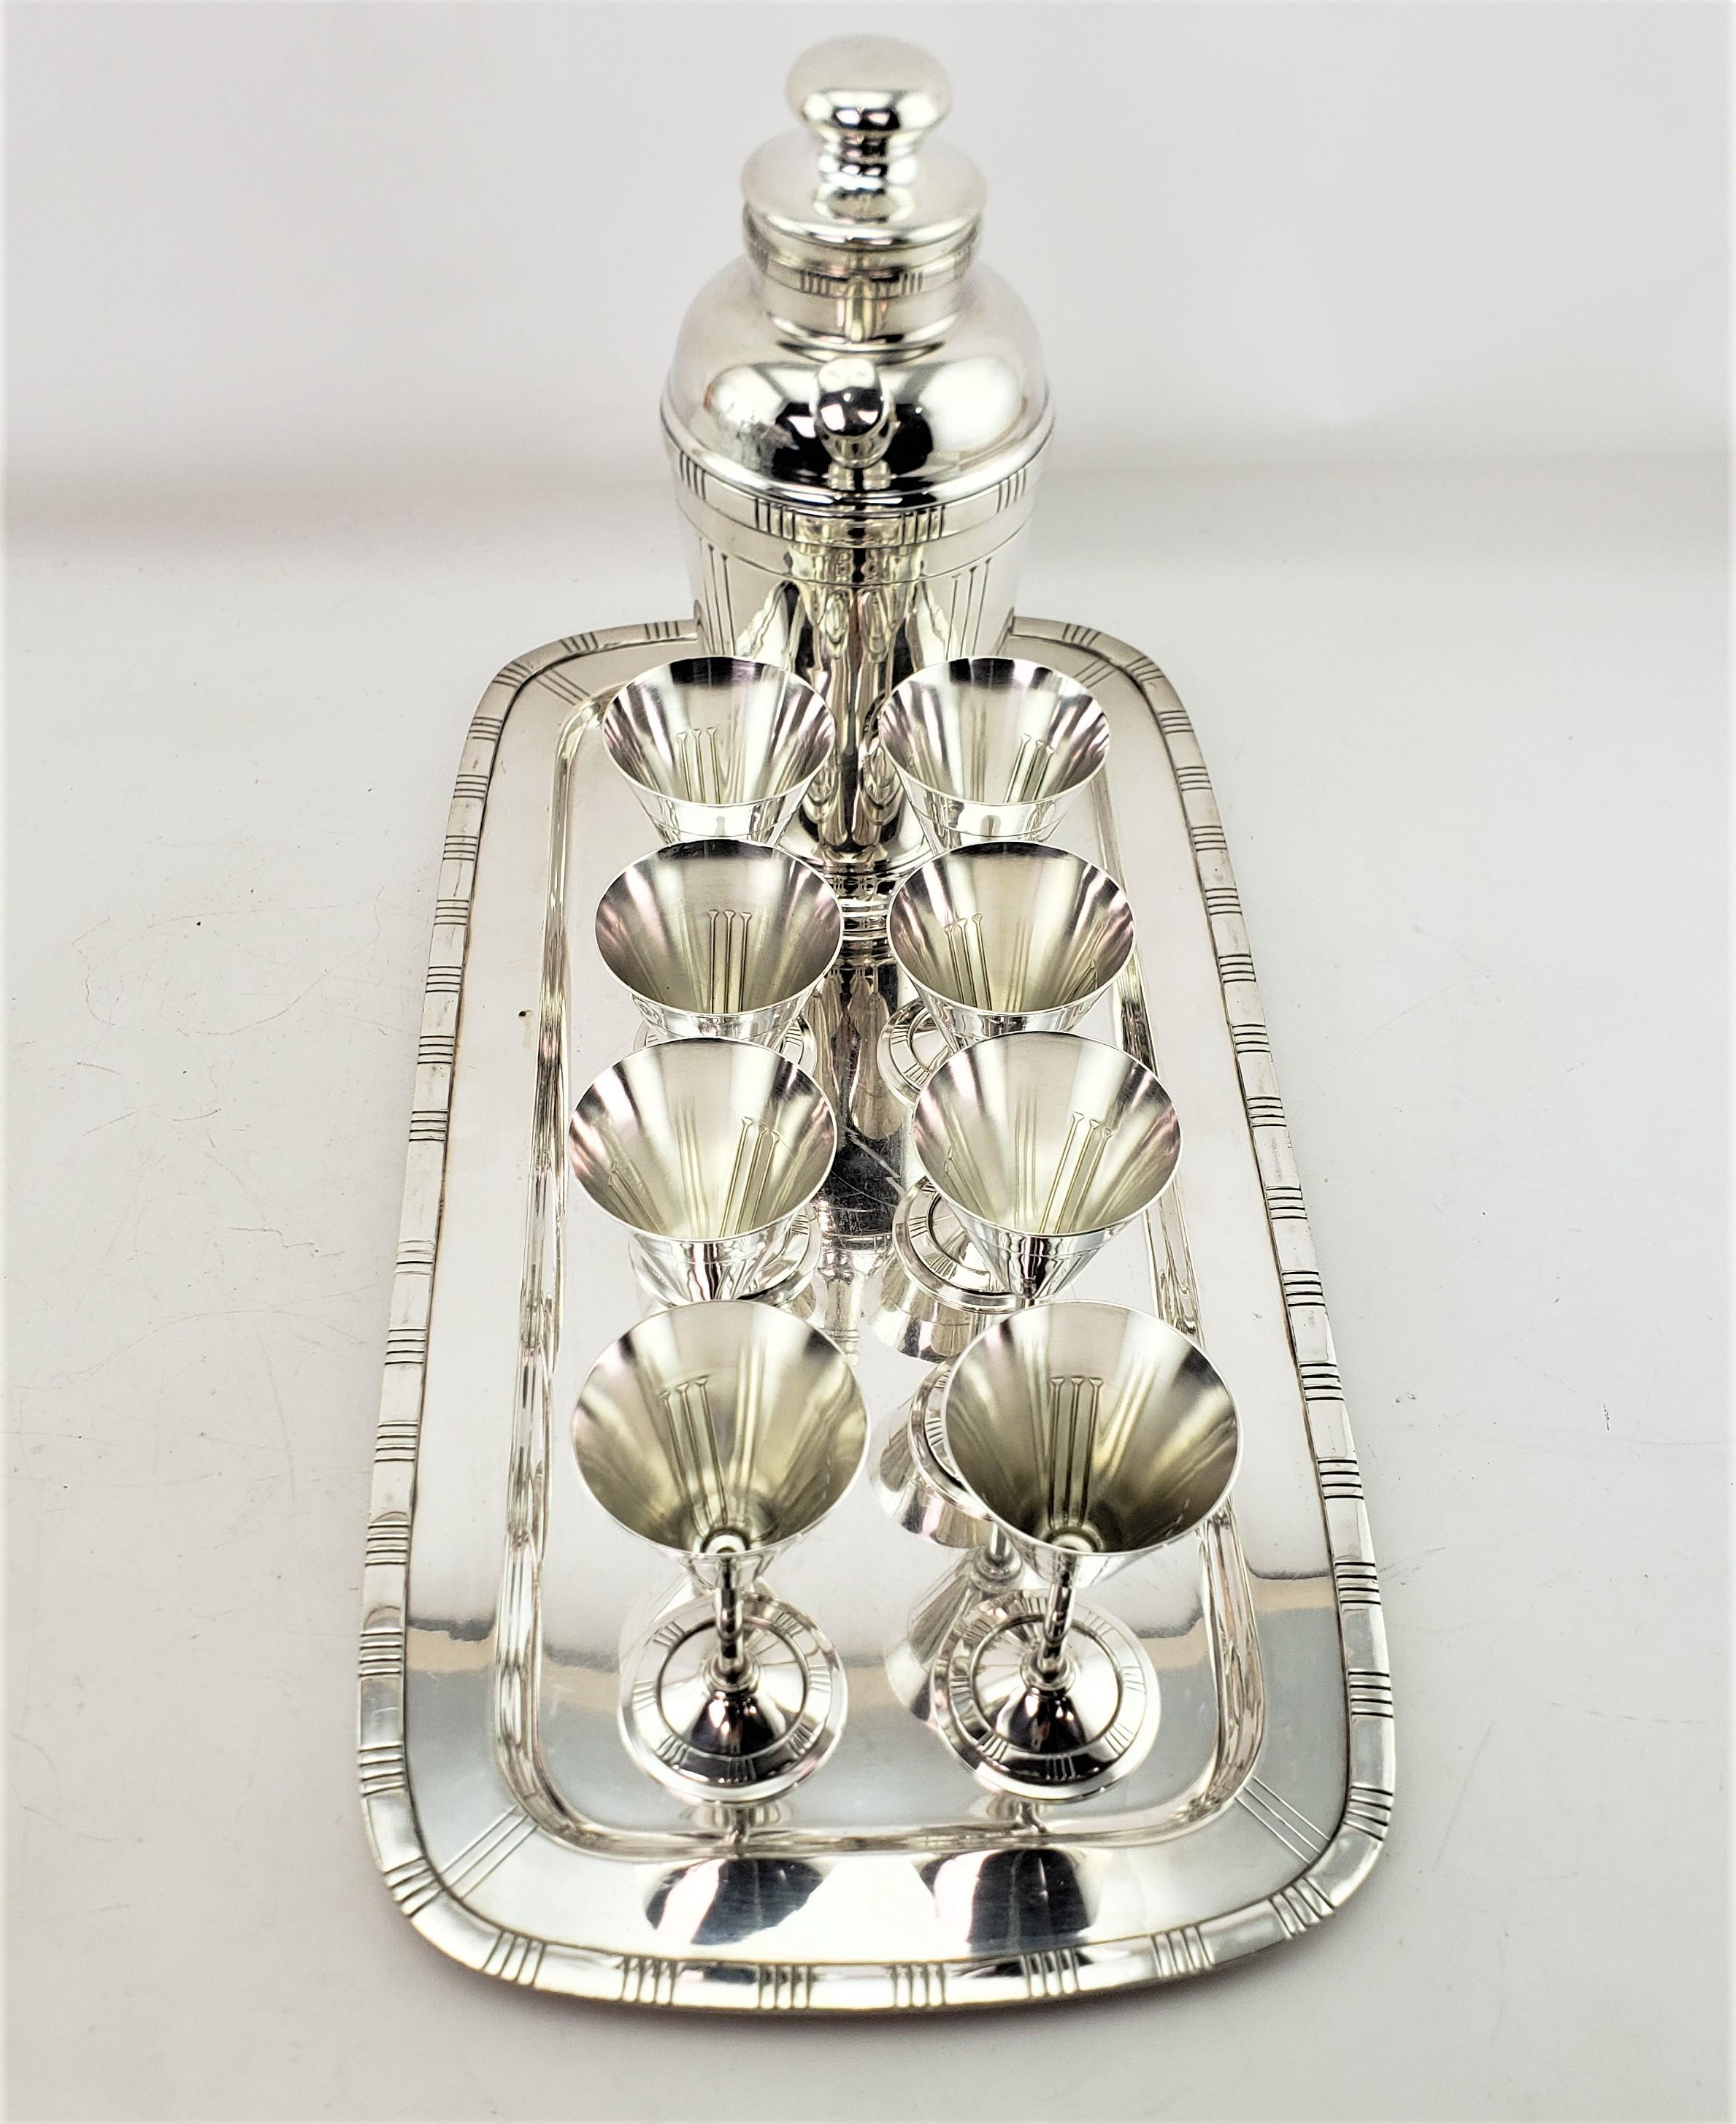 Midcentury Silver Plated Cocktail Set with Tray, Glasses & Shaker Pitcher For Sale 1